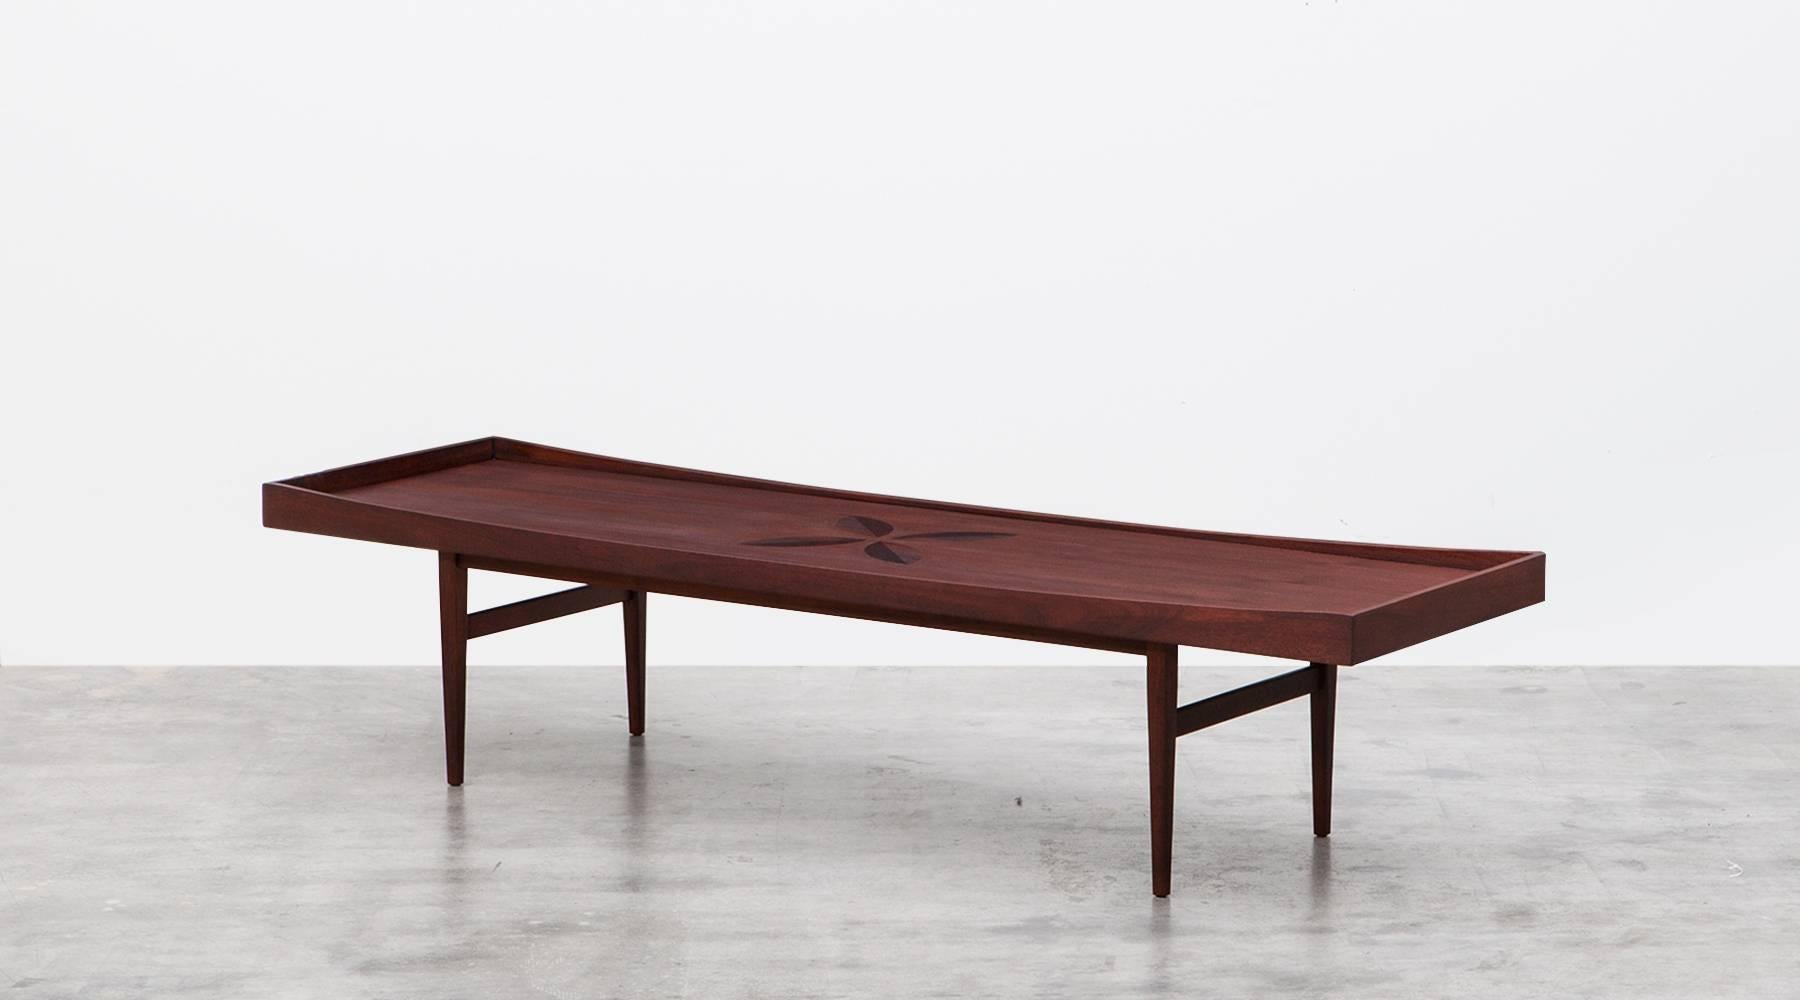 Fantastic coffee table designed by Kipp Stewart in 1955. The table comes in walnut with a wooden inlay in leaf ornament, the edges are curved and gives a elegant look. Manufactured by Calvin.

Trained architect Kipp Stewart distinguished himself as